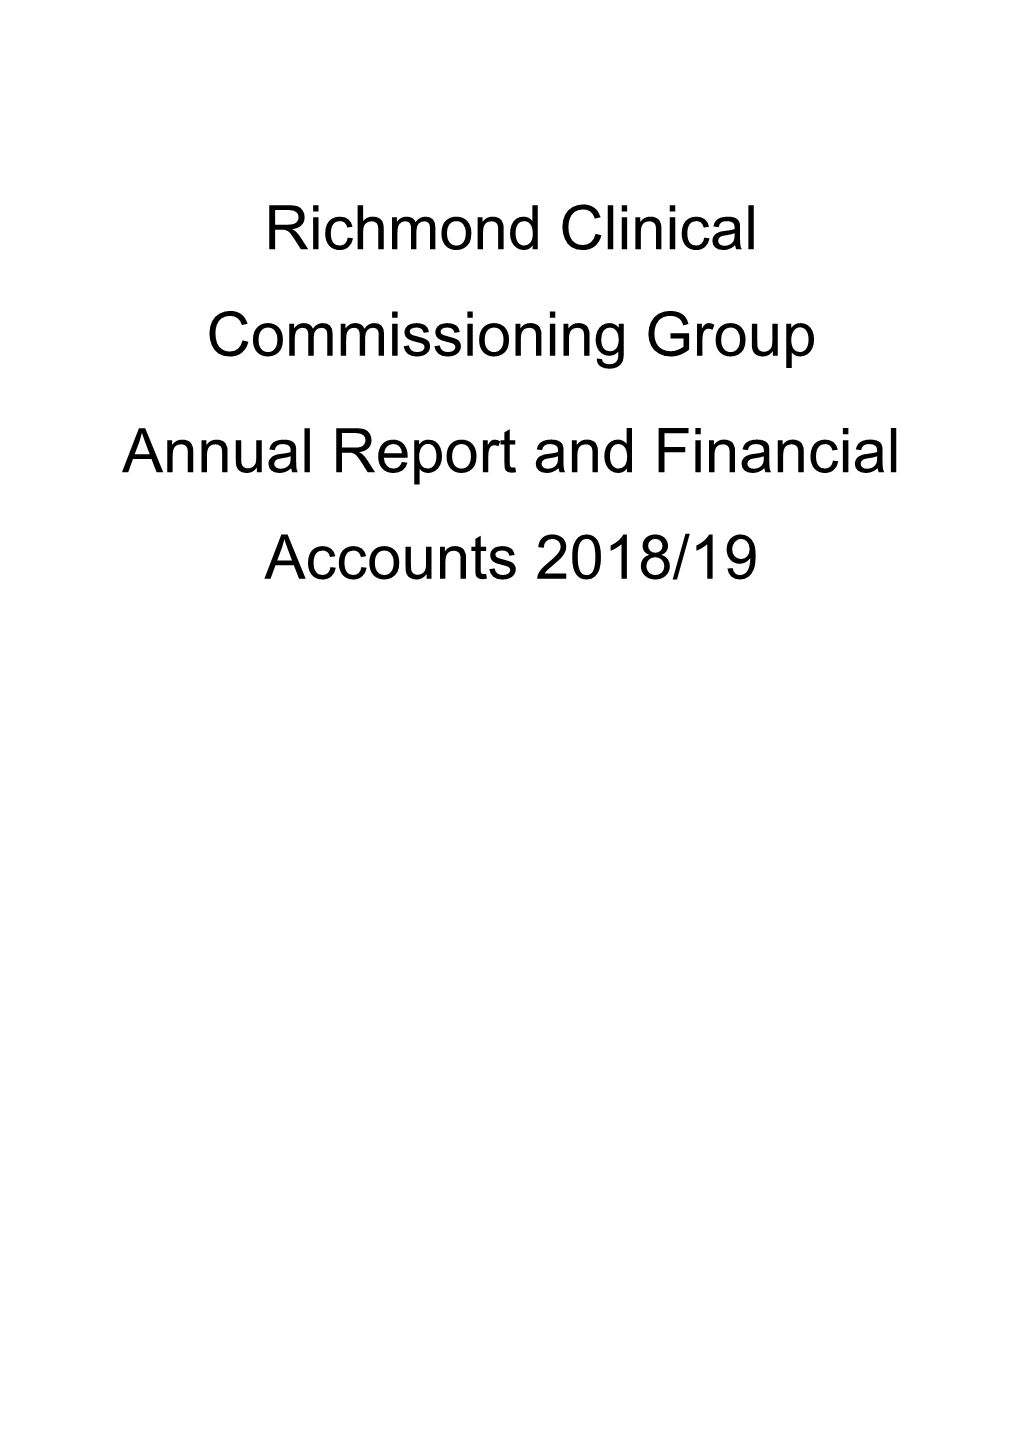 NHS Richmond Clinical Commissioning Group’S Annual Report for the Financial Year 2018/19